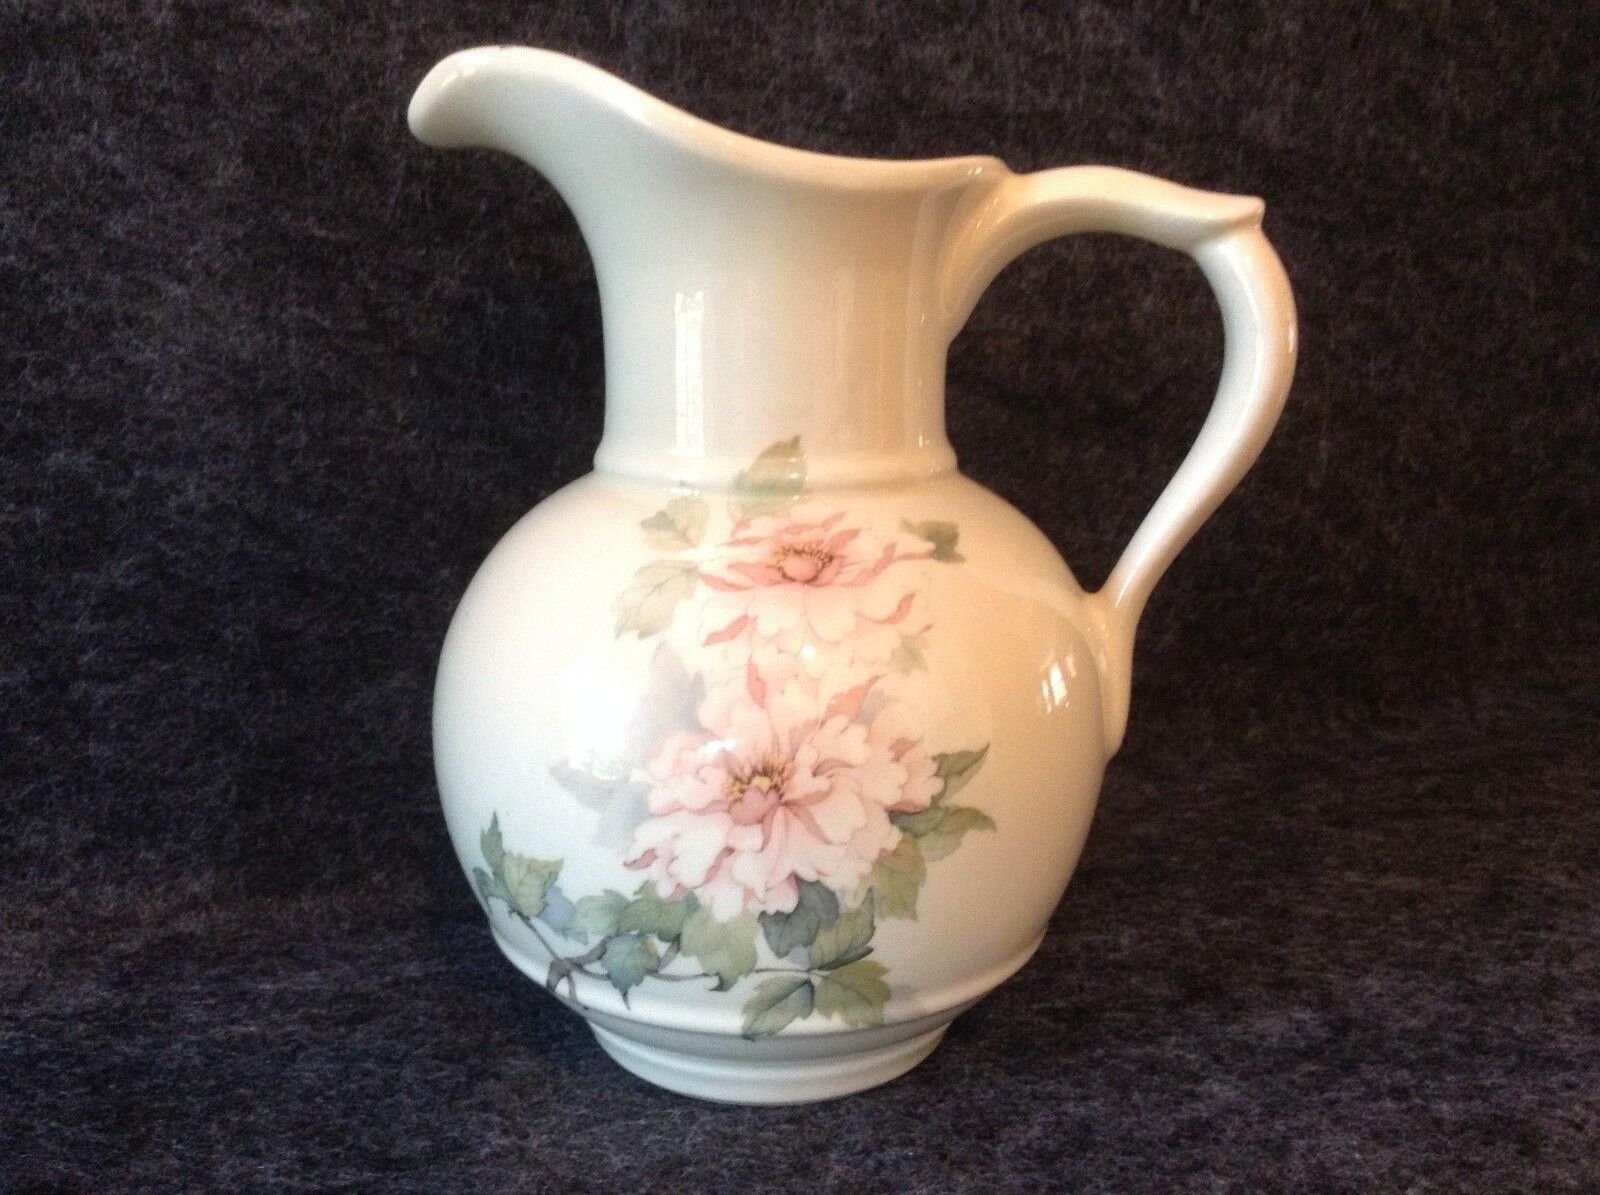 Vintage White Vase with Flowers, Made in the USA (#7541) MCM Collectible Pitcher